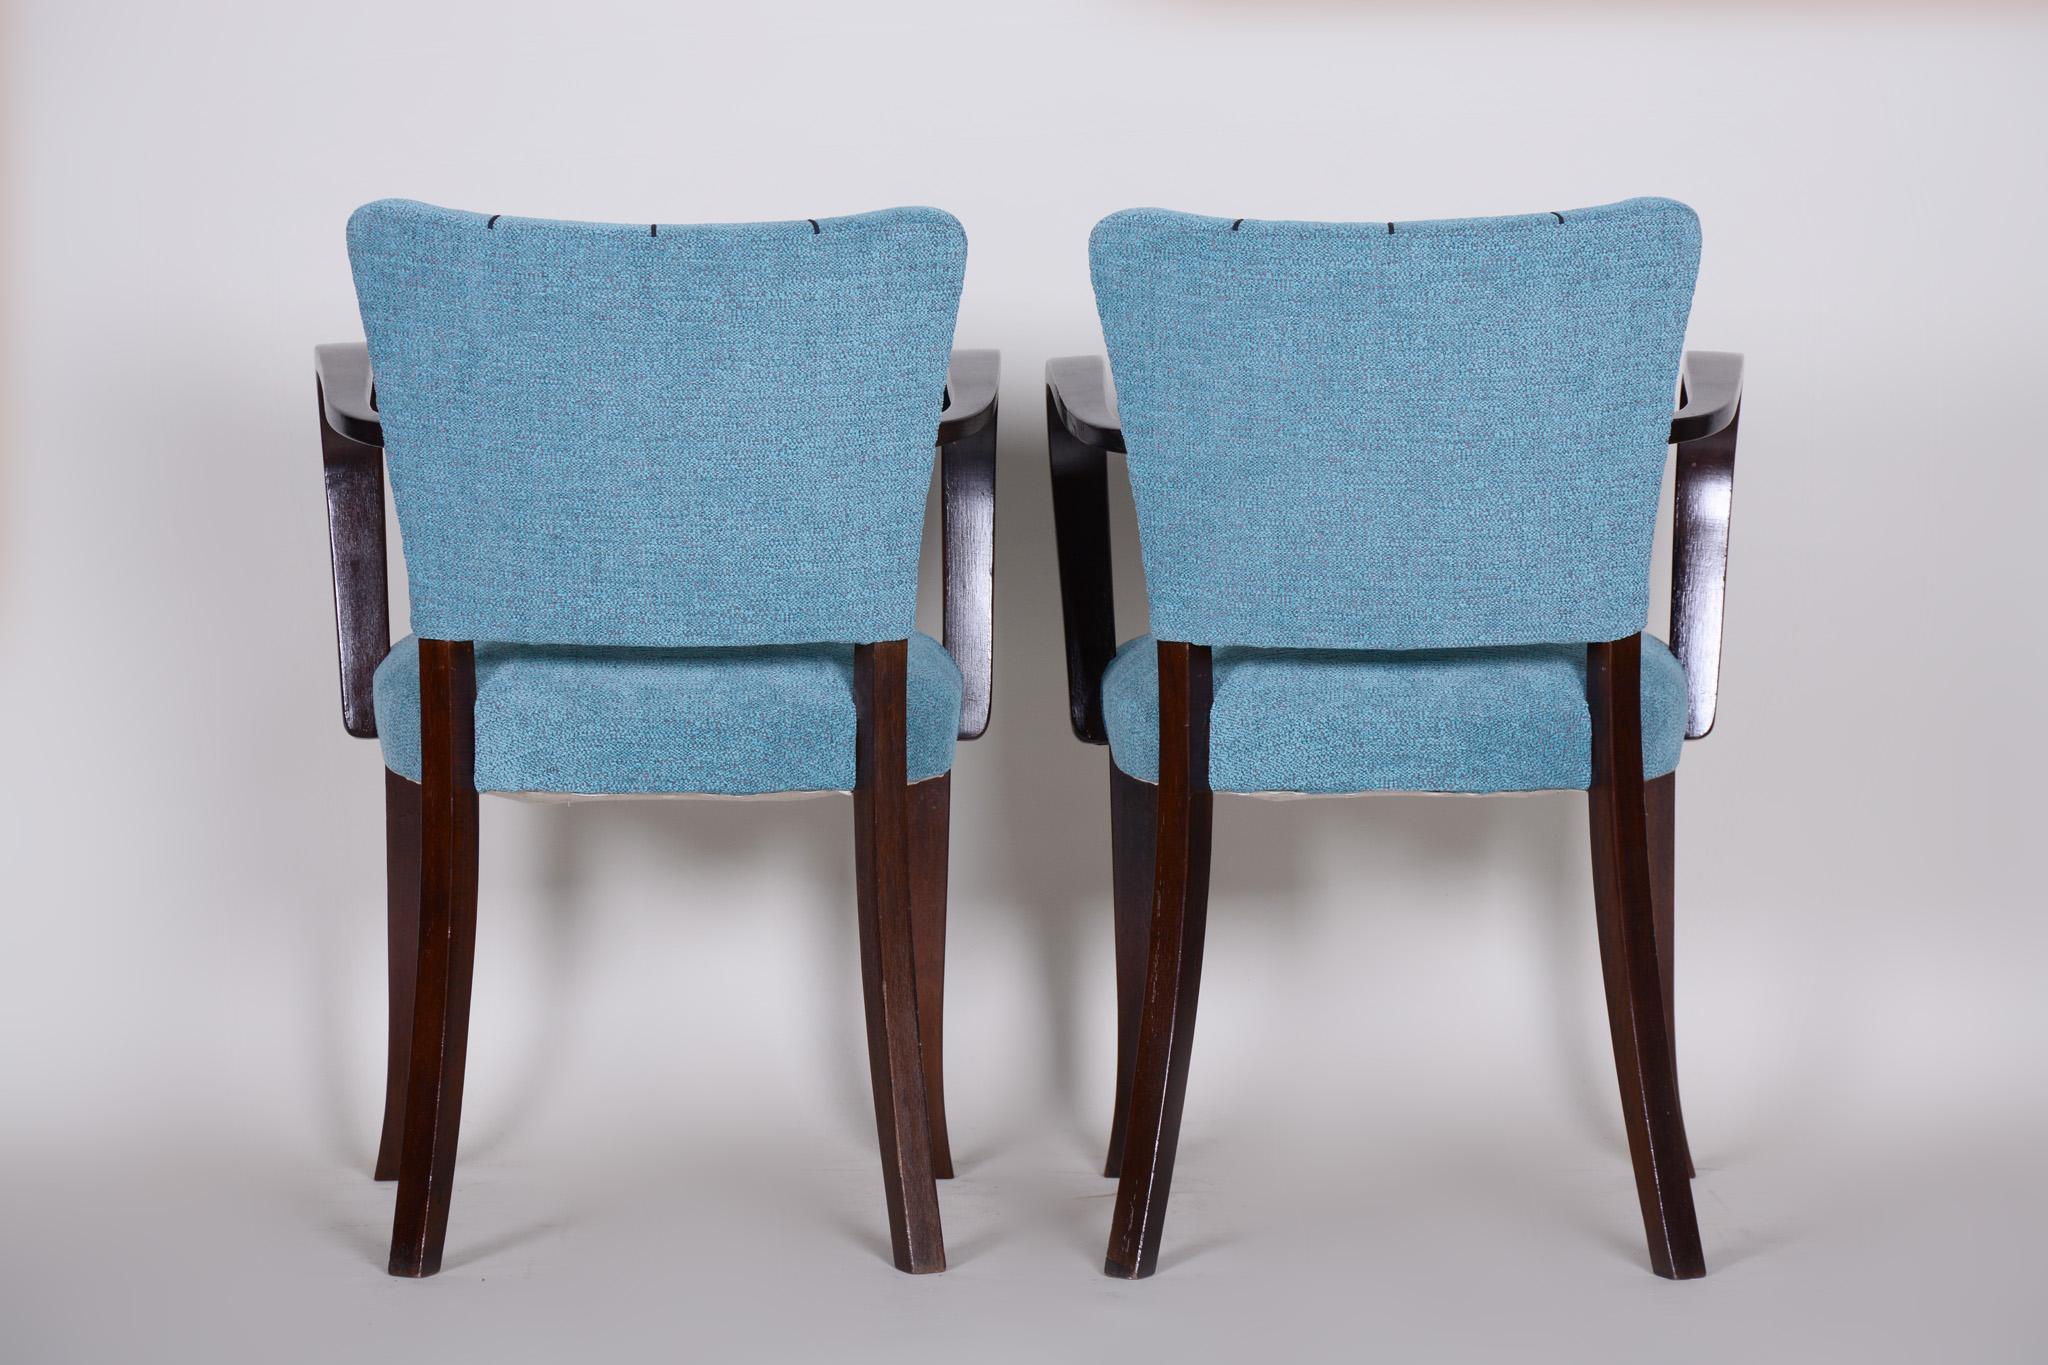 Pair of Restored Art Deco Blue Oak Armchairs, 1930s, France, New Upholstery 1